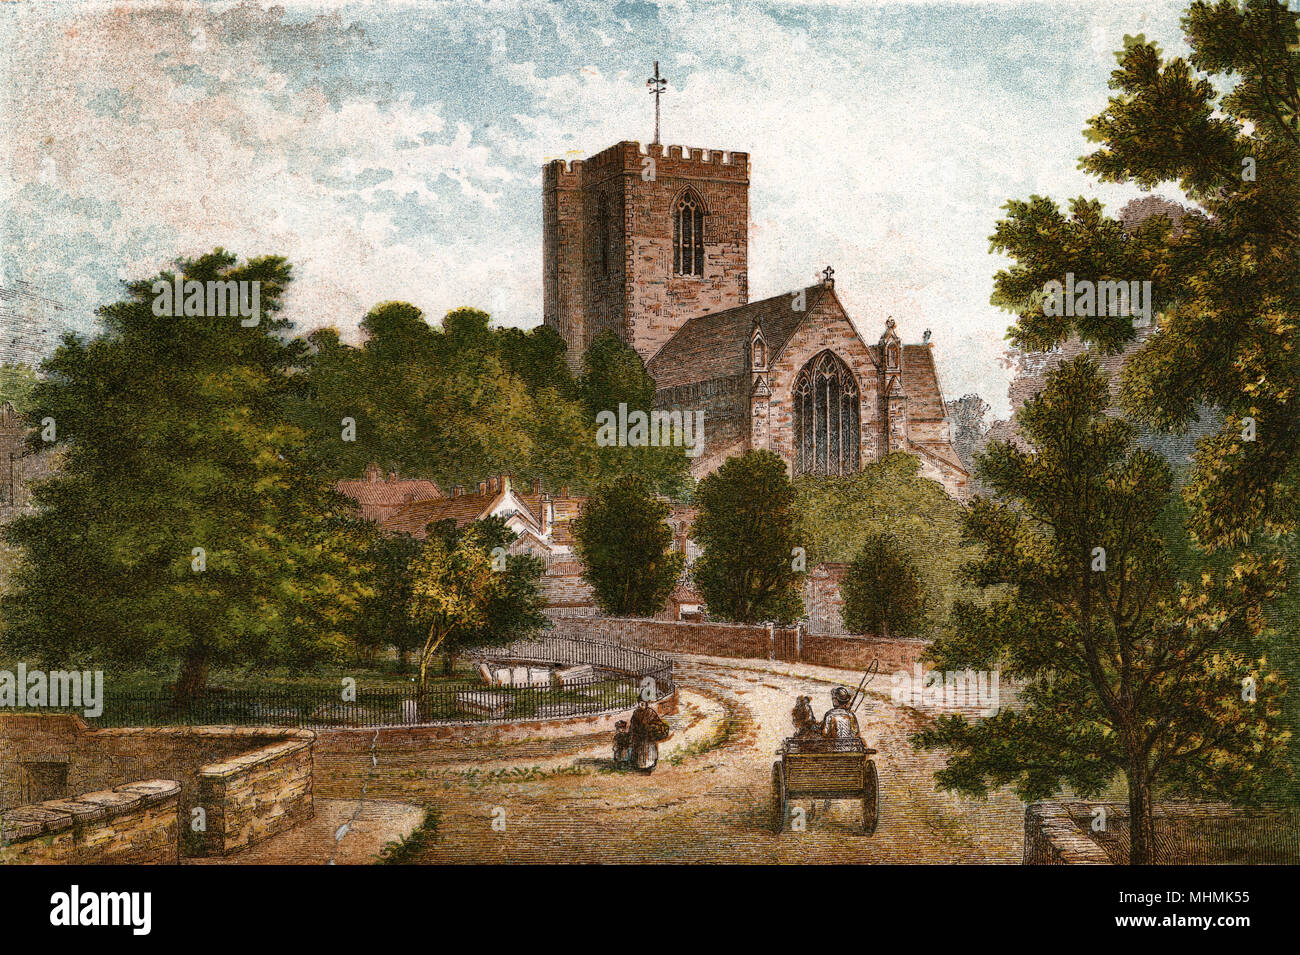 ST ASAPH CATHEDRAL 1877 Stock Photo